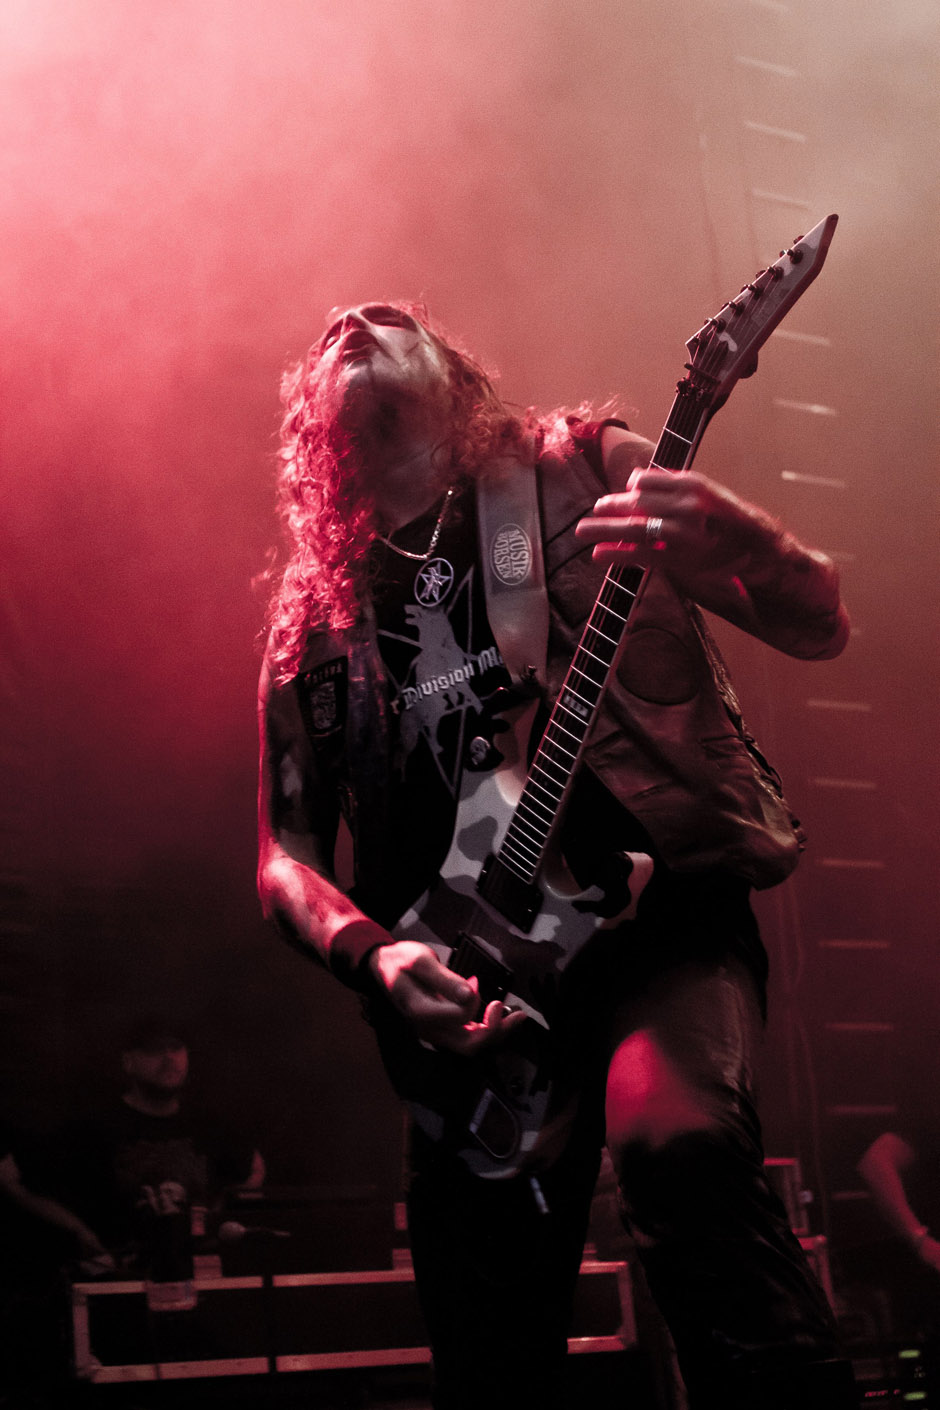 Marduk live, Extremefest 2012 in Hünxe